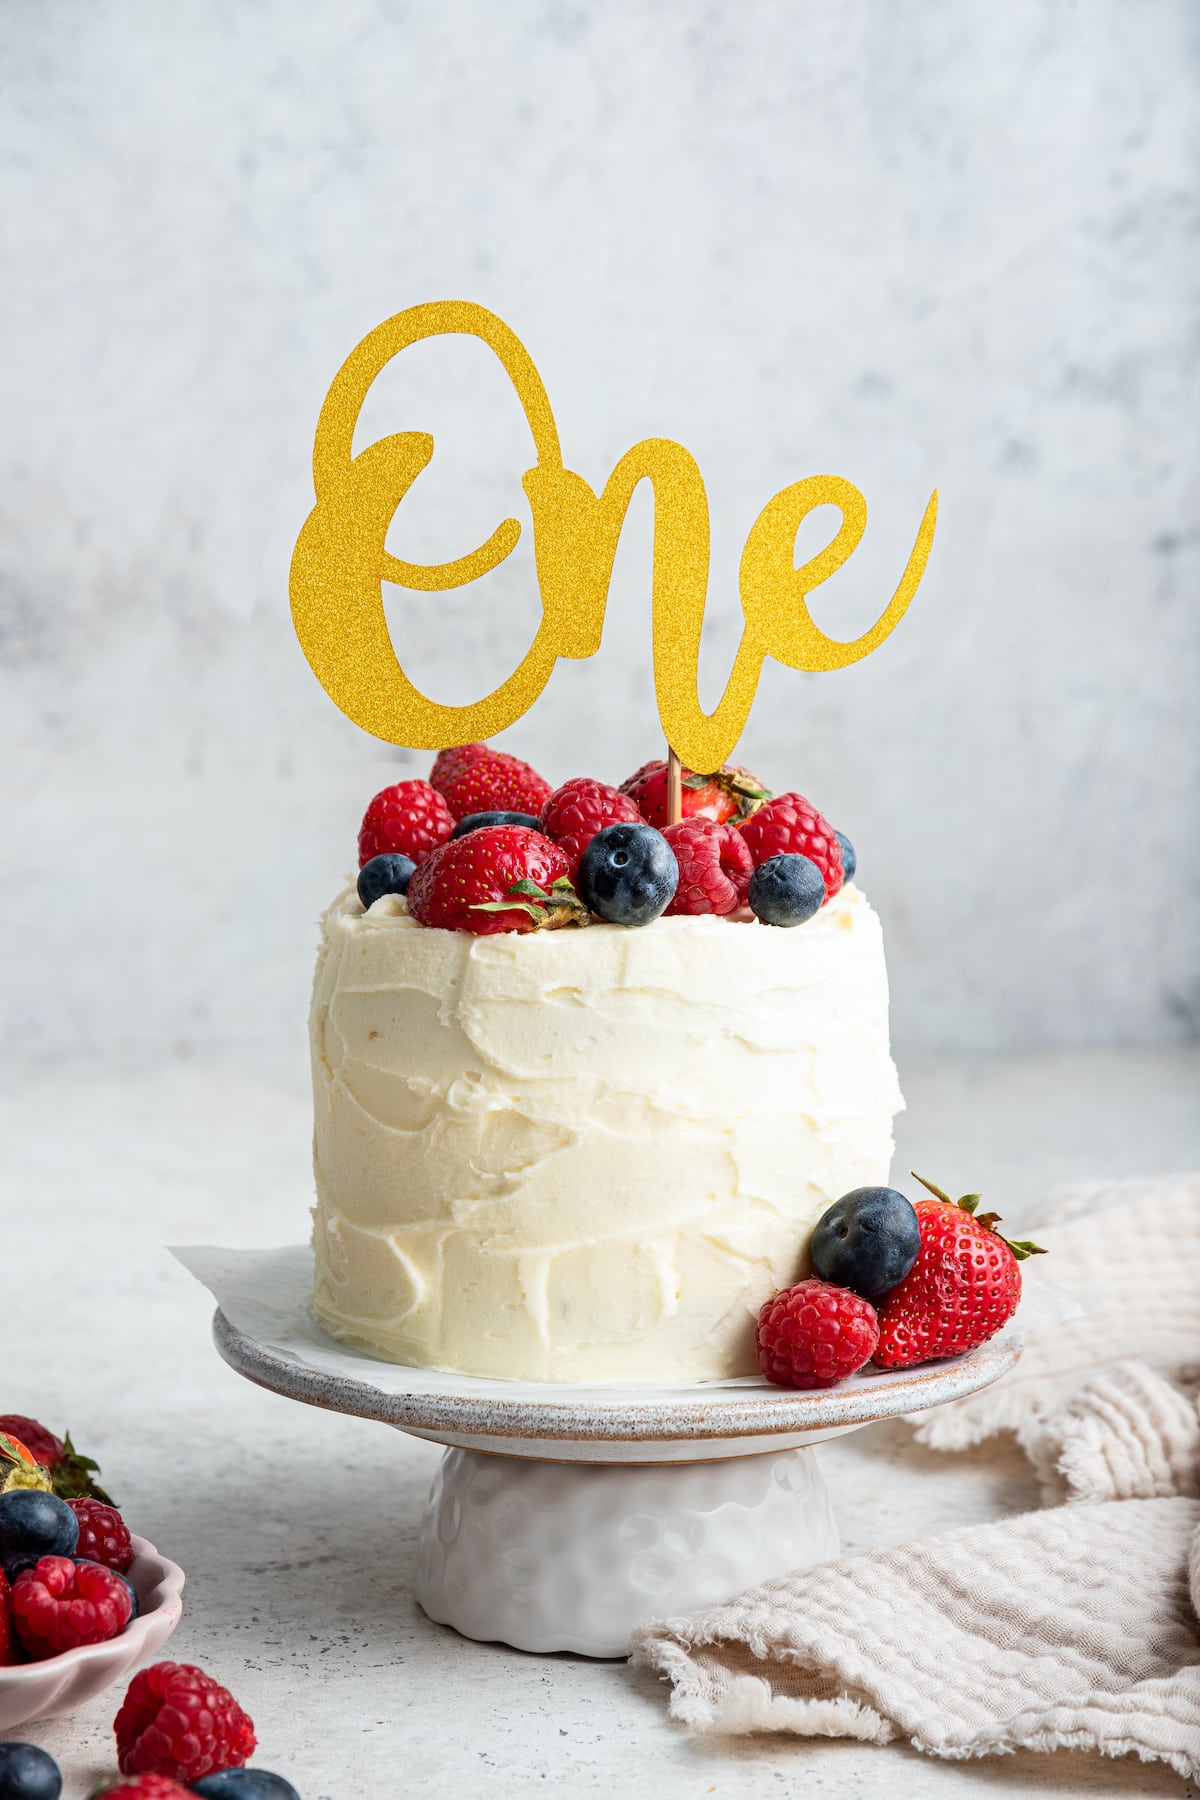 A frosted smash cake with a one sign topped with fresh berries sitting on a cake stand.